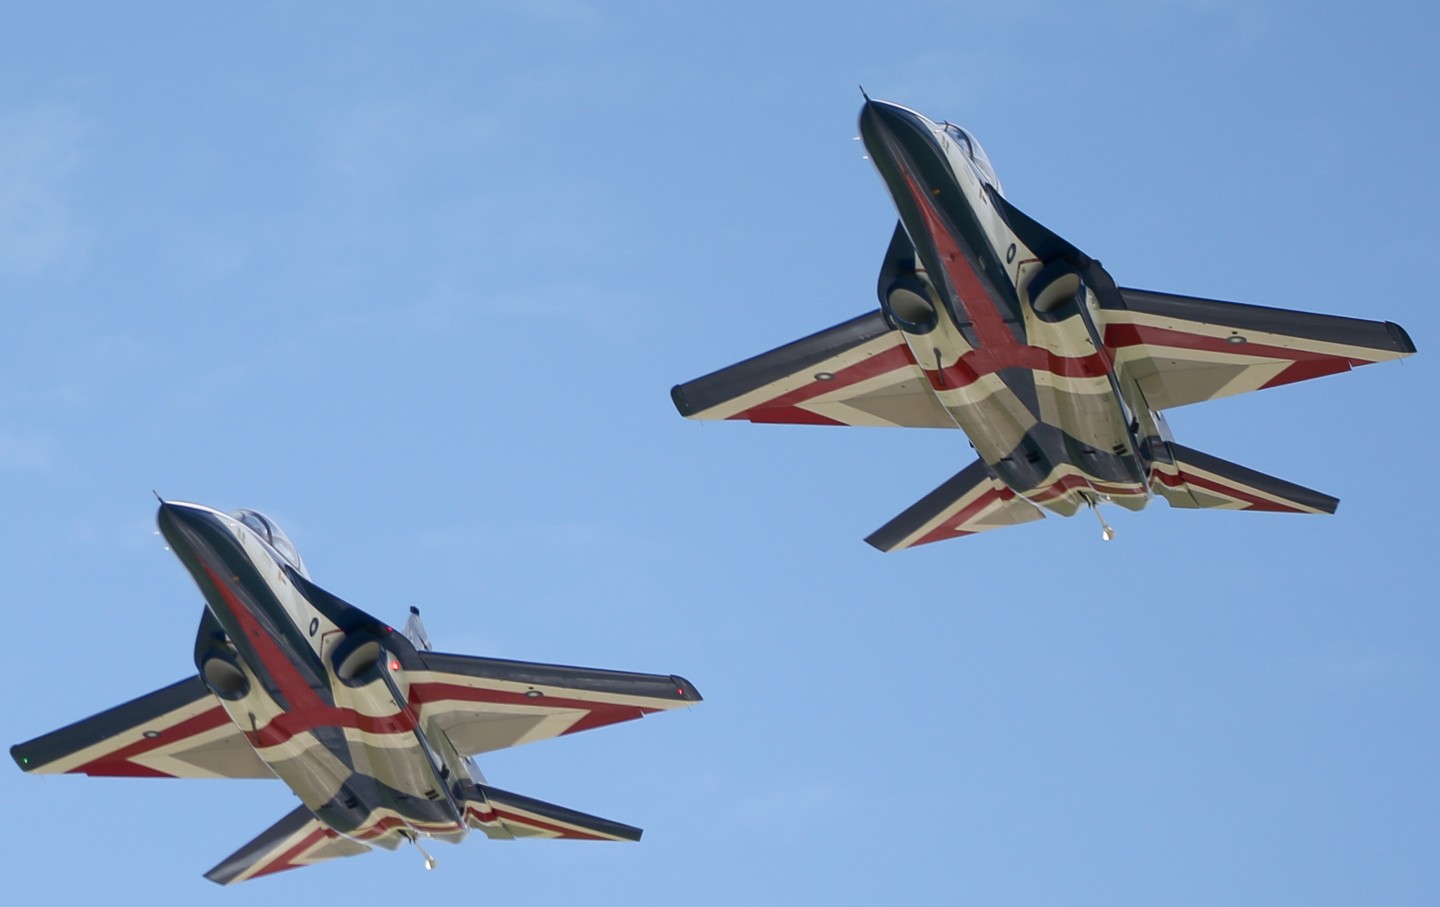 Taiwan Air Force Brave Eagle advanced jet trainers fly during a demonstration over in Taitung County, Taiwan, on Wednesday, July 6, 2022.